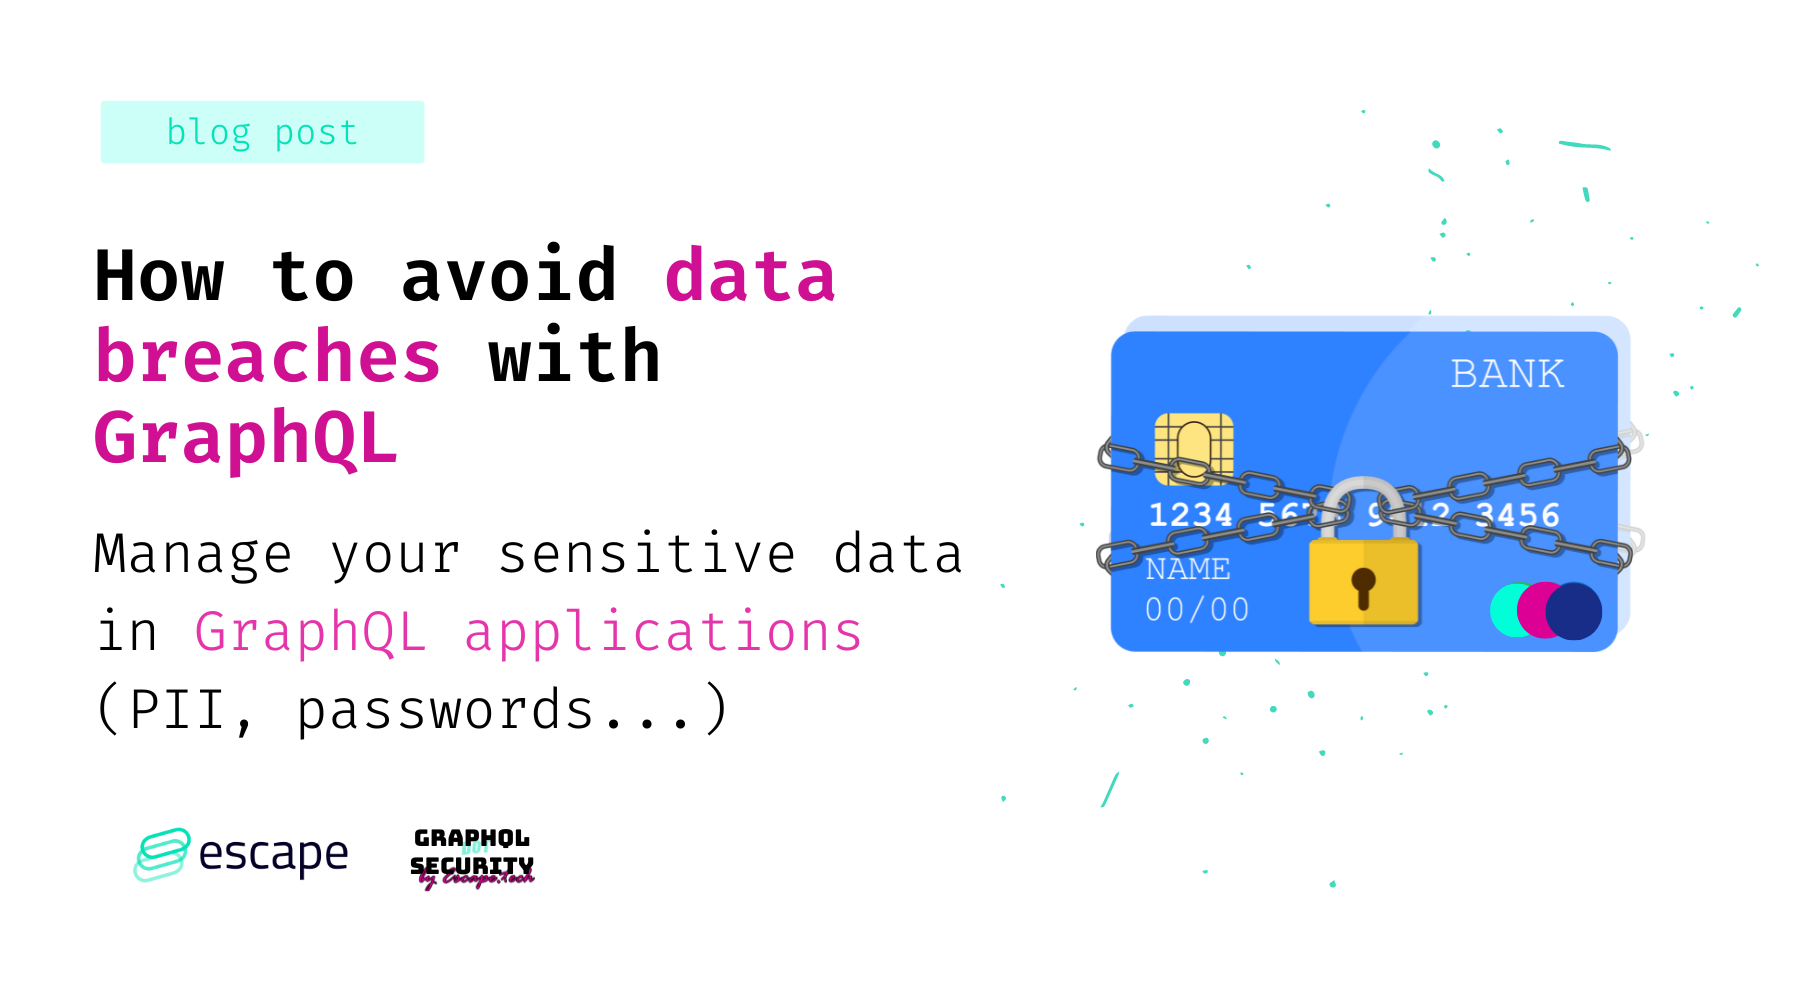 How to avoid data breaches with GraphQL?